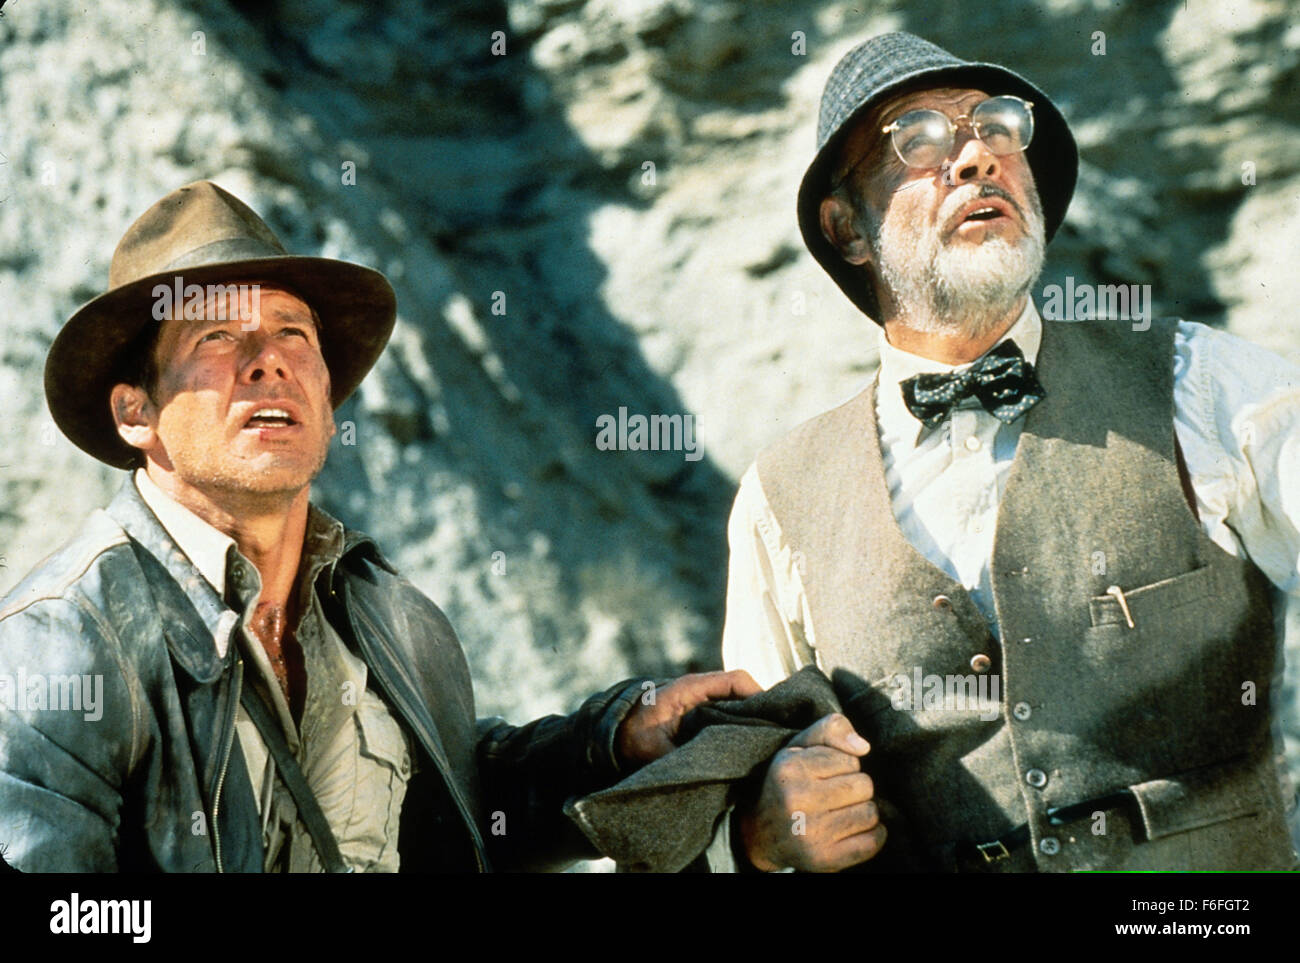 May 24, 1989; Los Angeles, CA, USA; Director Steven Spielberg and Paramount Pictures brings you 'Indiana Jones and the Last Crusade' starring HARRISON FORD as Indiana and SEAN CONNERY as Prof. Henry Jones. Stock Photo